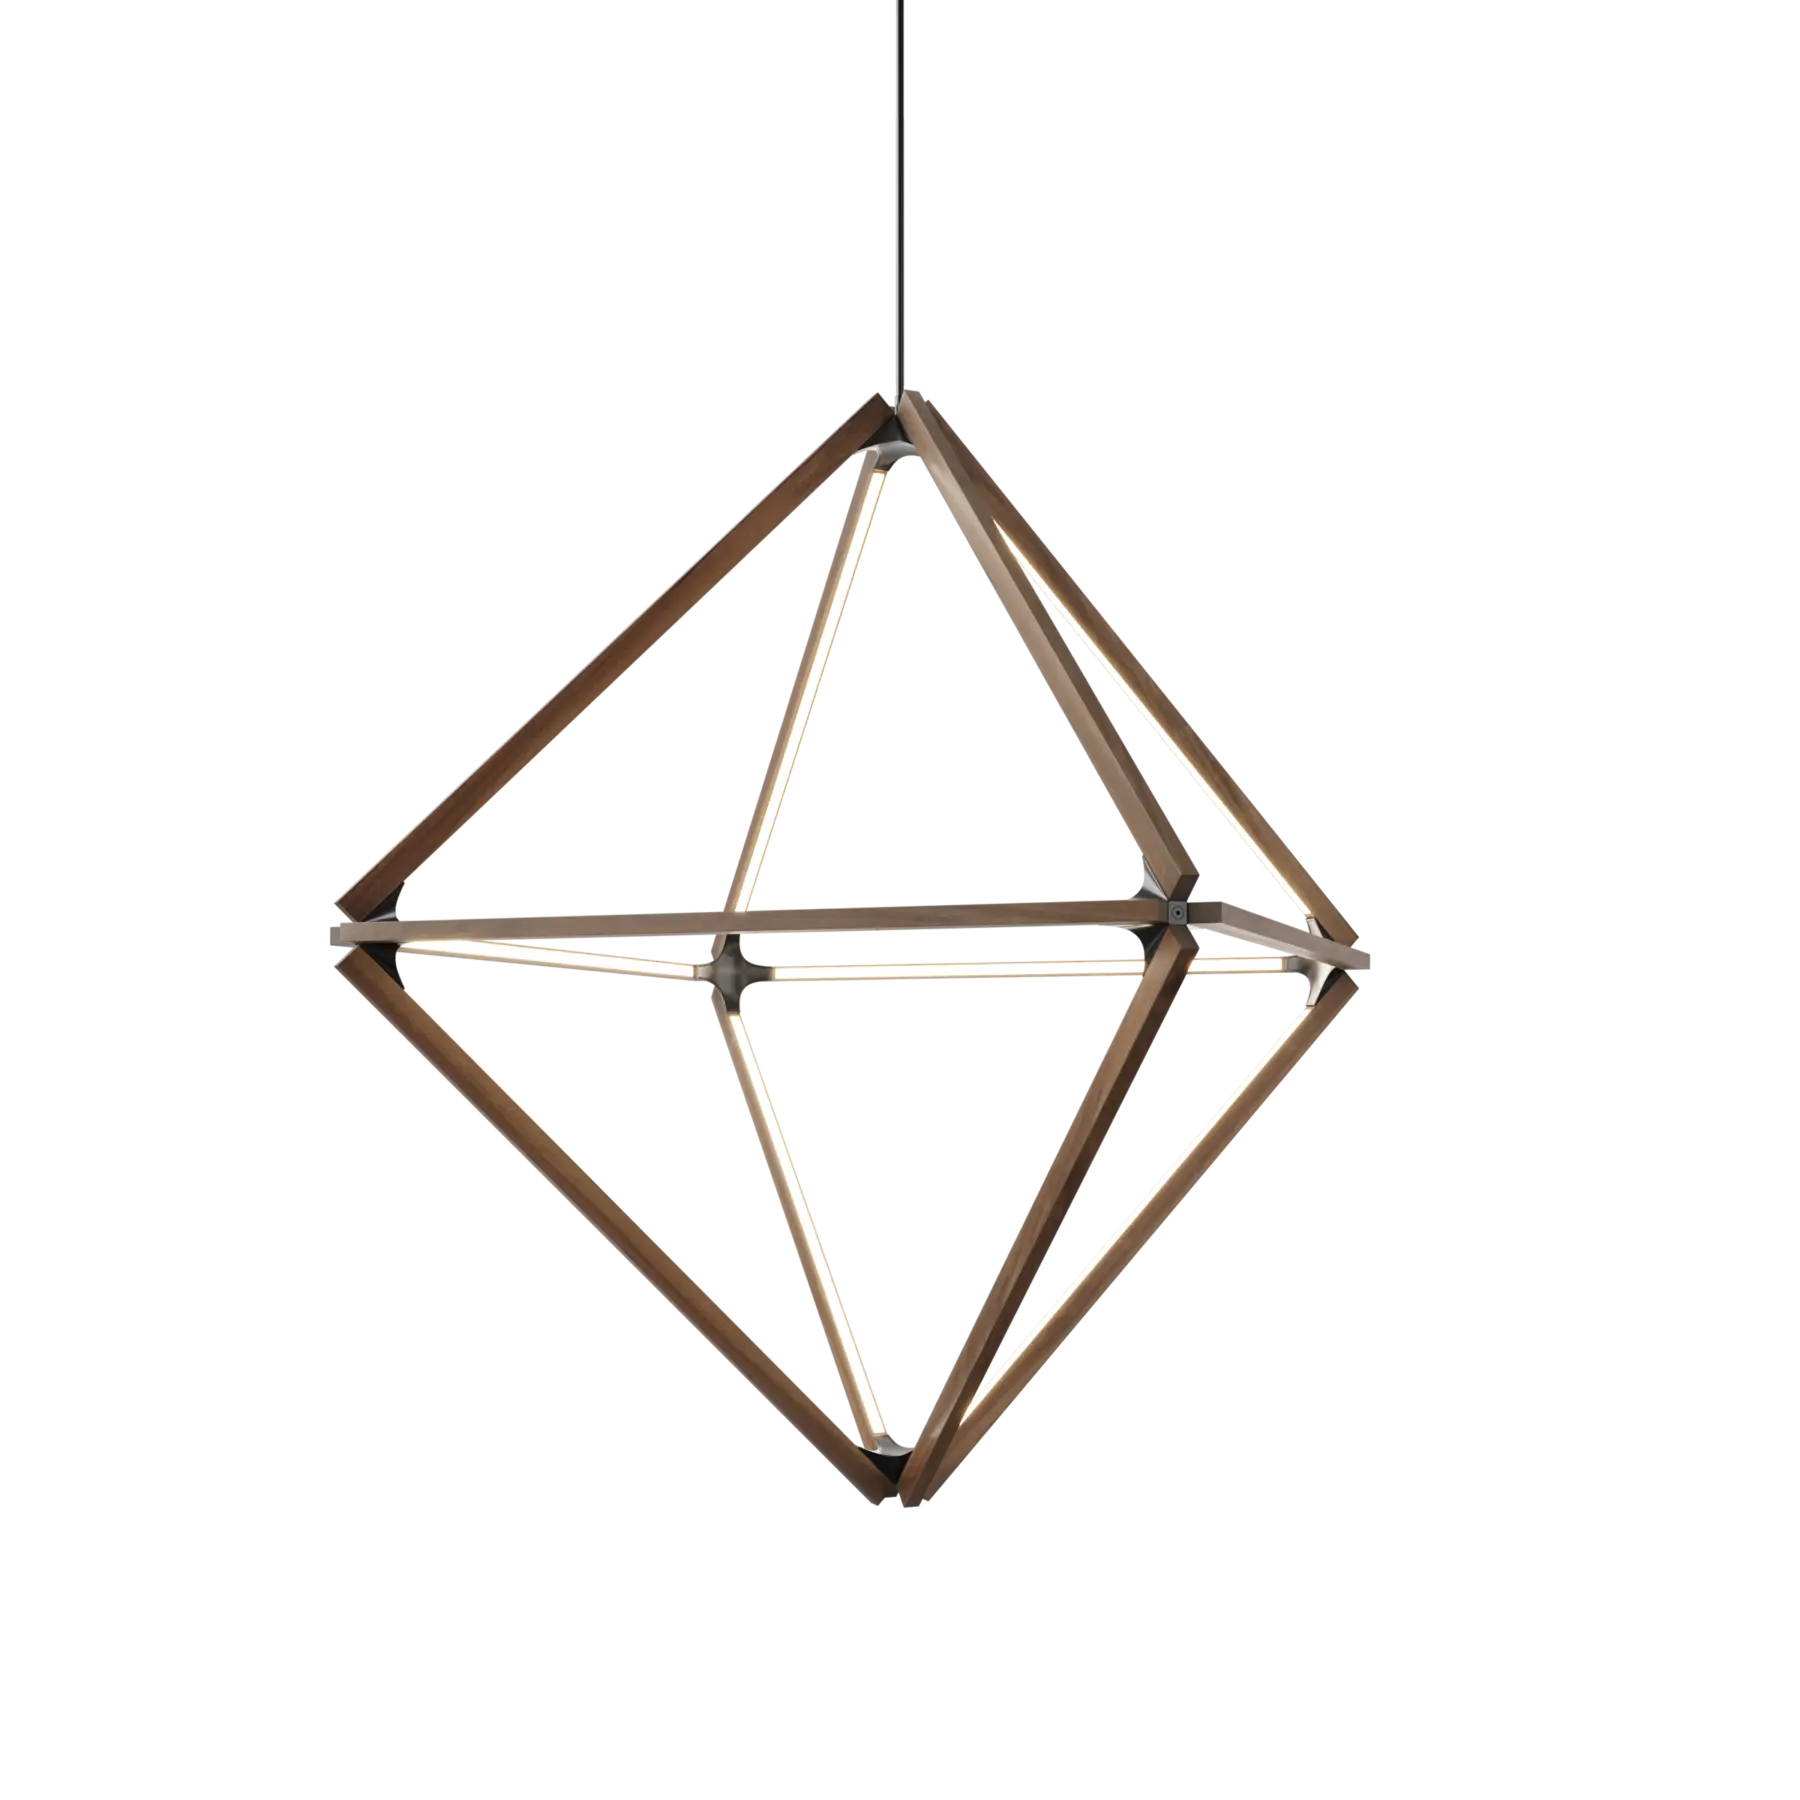 Image of a Stickbulb Diamond lighting fixture. The modern fixture consists of sleek wooden beams with multiple integrated LED bulbs. The bulbs emit warm, diffused light, casting a gentle glow in the surrounding space. The wooden beam is suspended from thin cables, giving it a floating appearance.